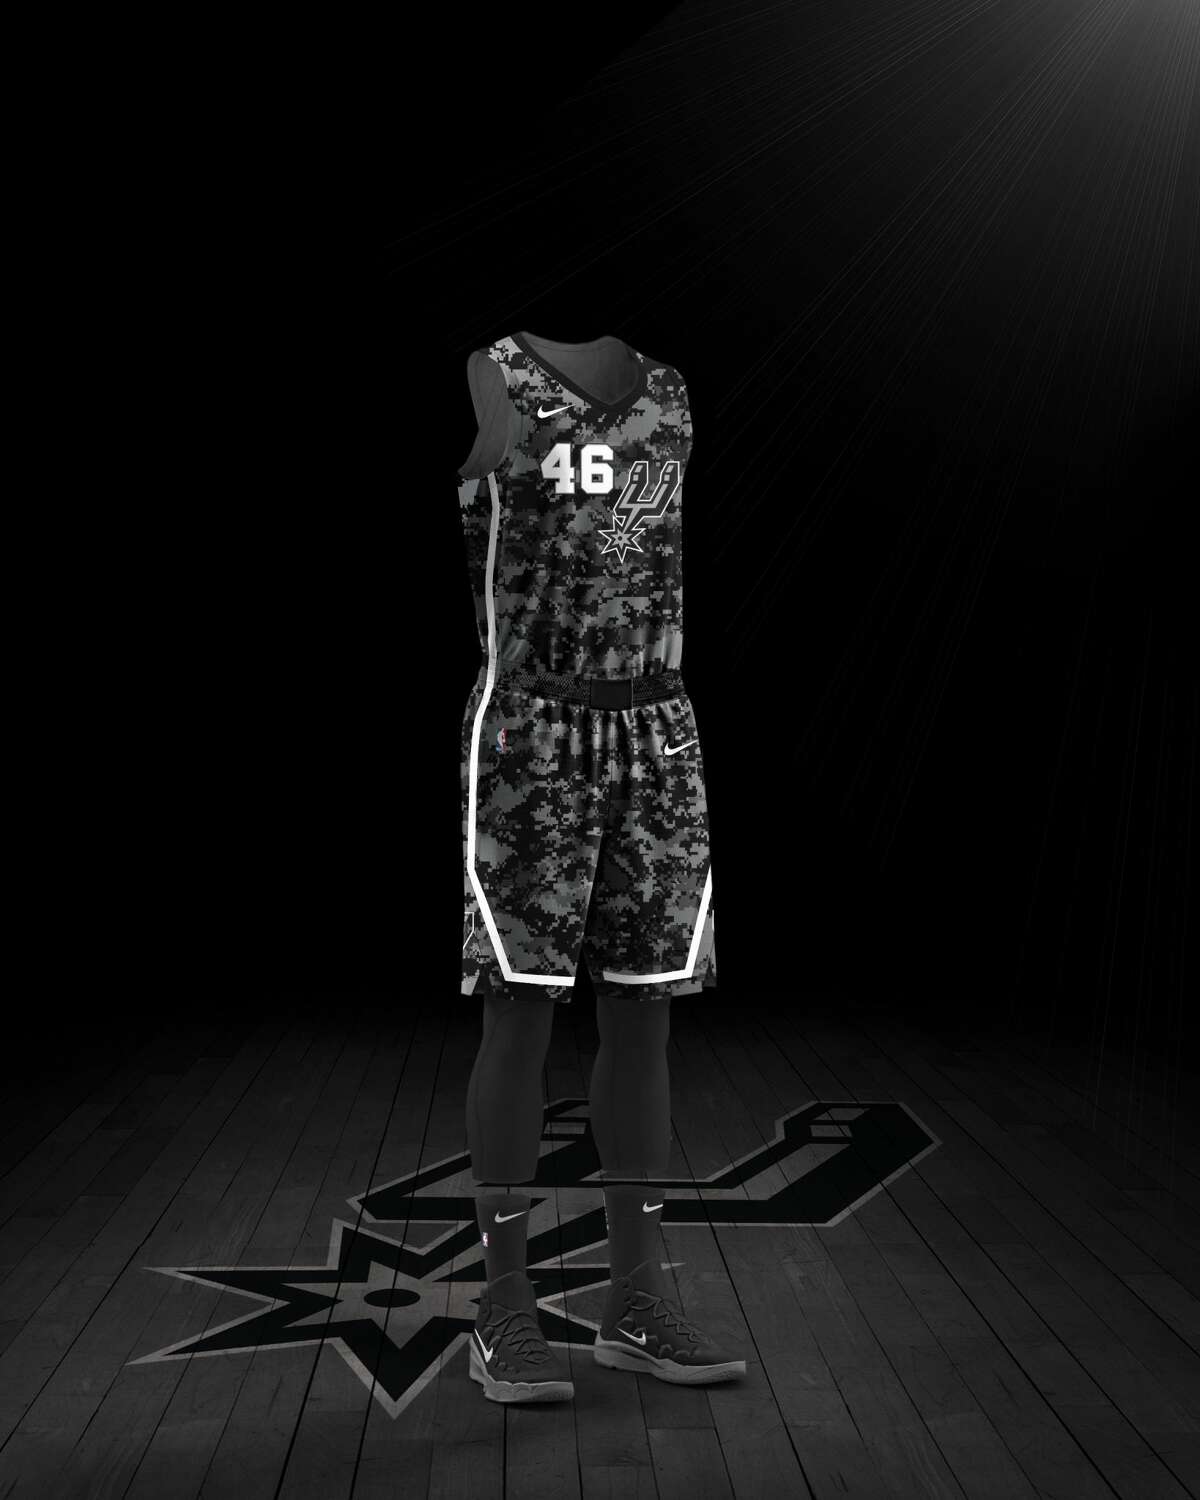 Spurs announce another camouflage jersey as this season's Nike